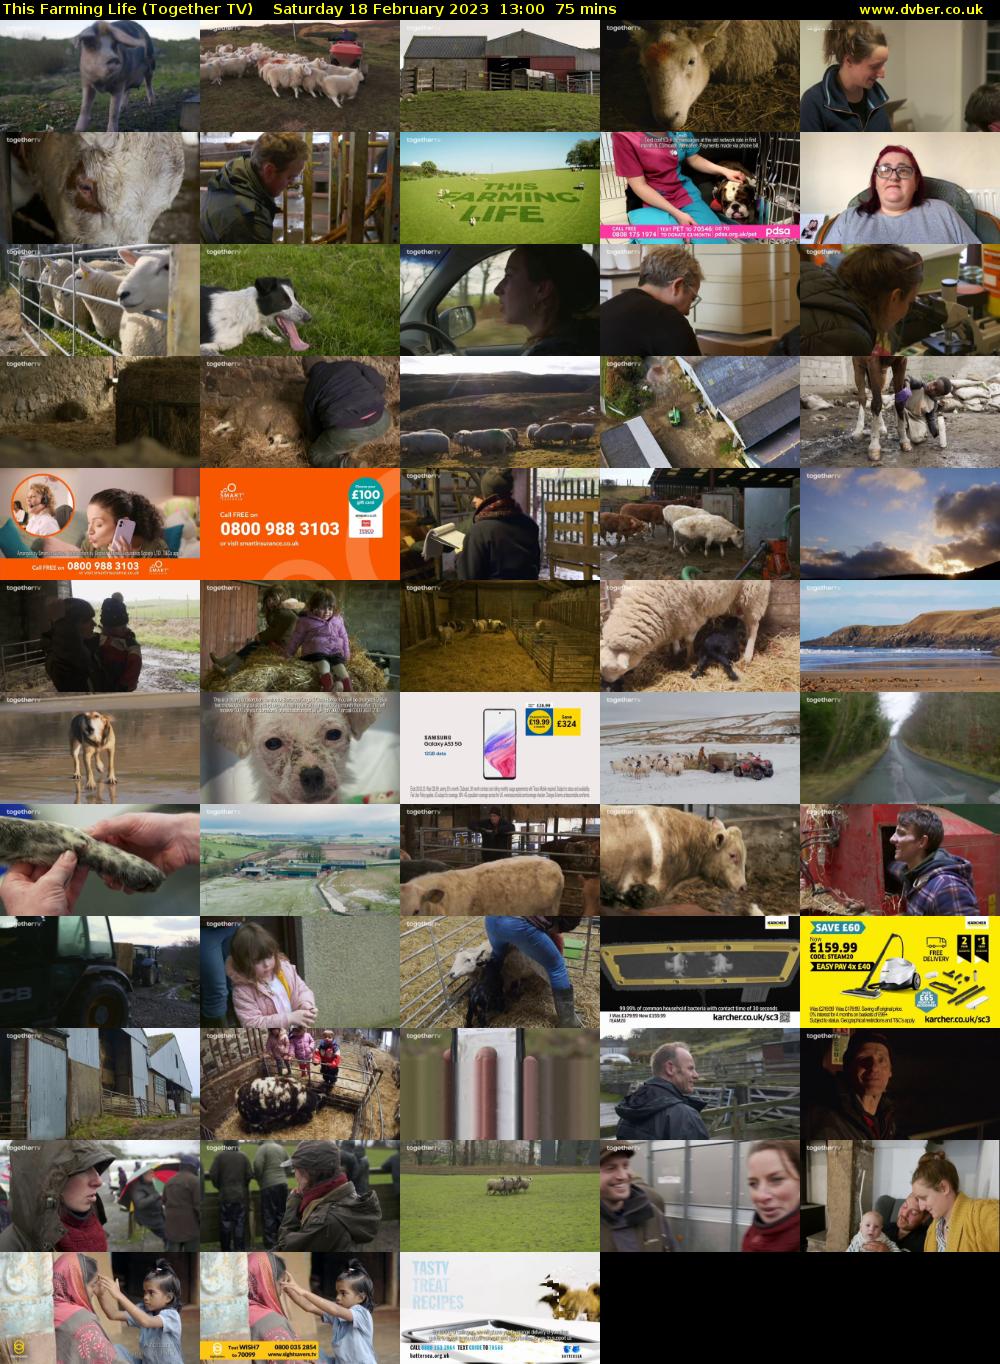 This Farming Life (Together TV) Saturday 18 February 2023 13:00 - 14:15